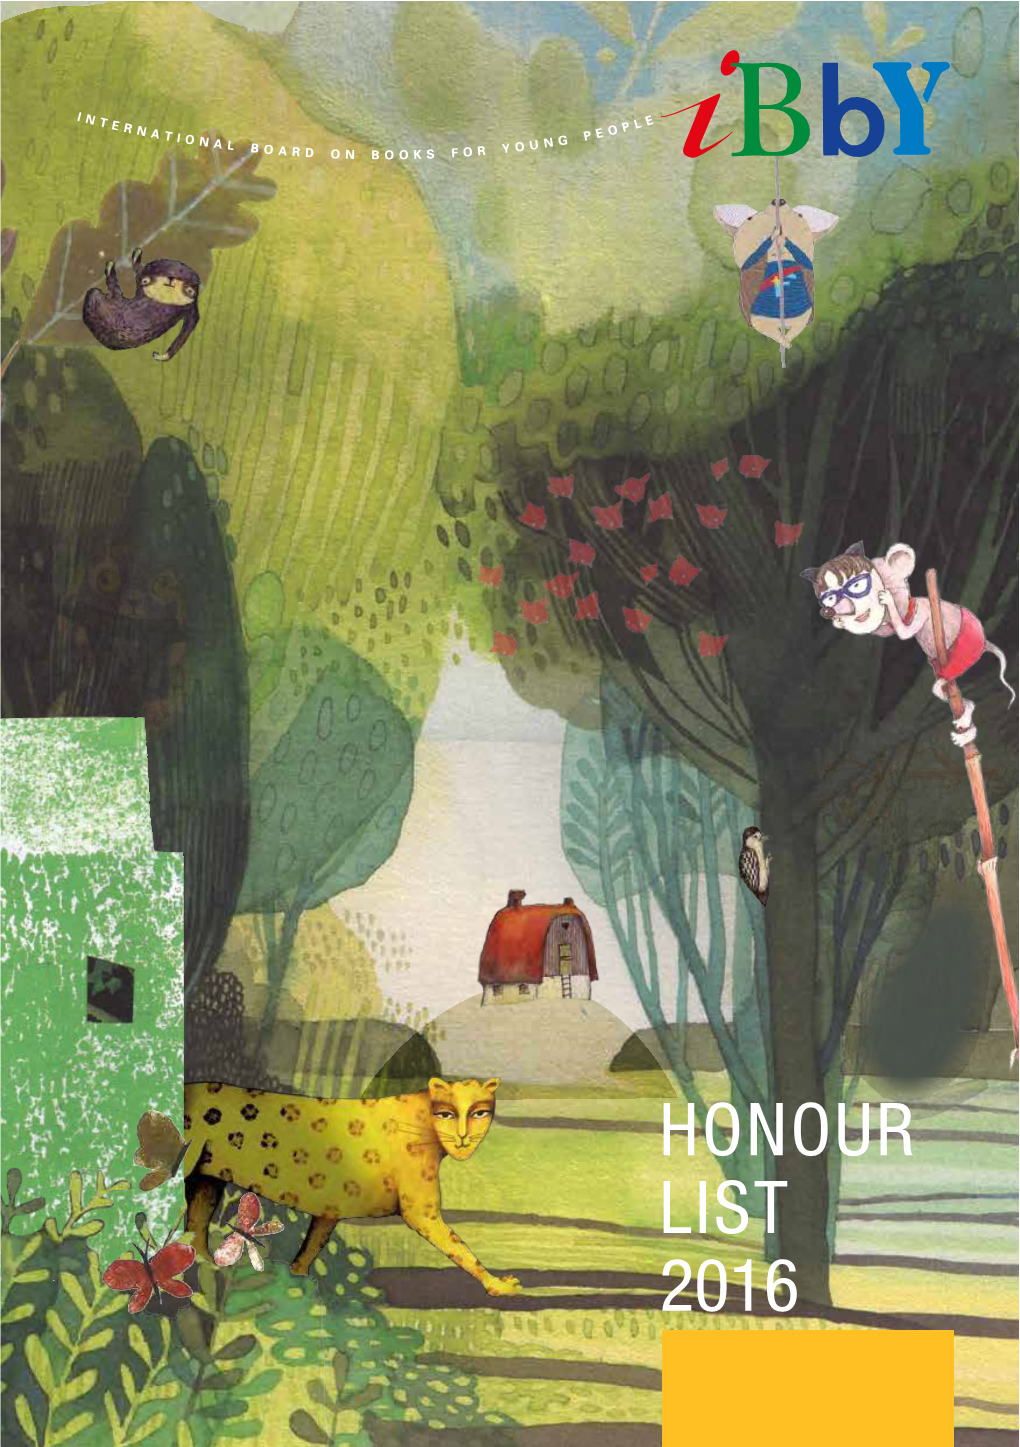 HONOUR LIST 2016 © International Board on Books for Young People (IBBY), 2016